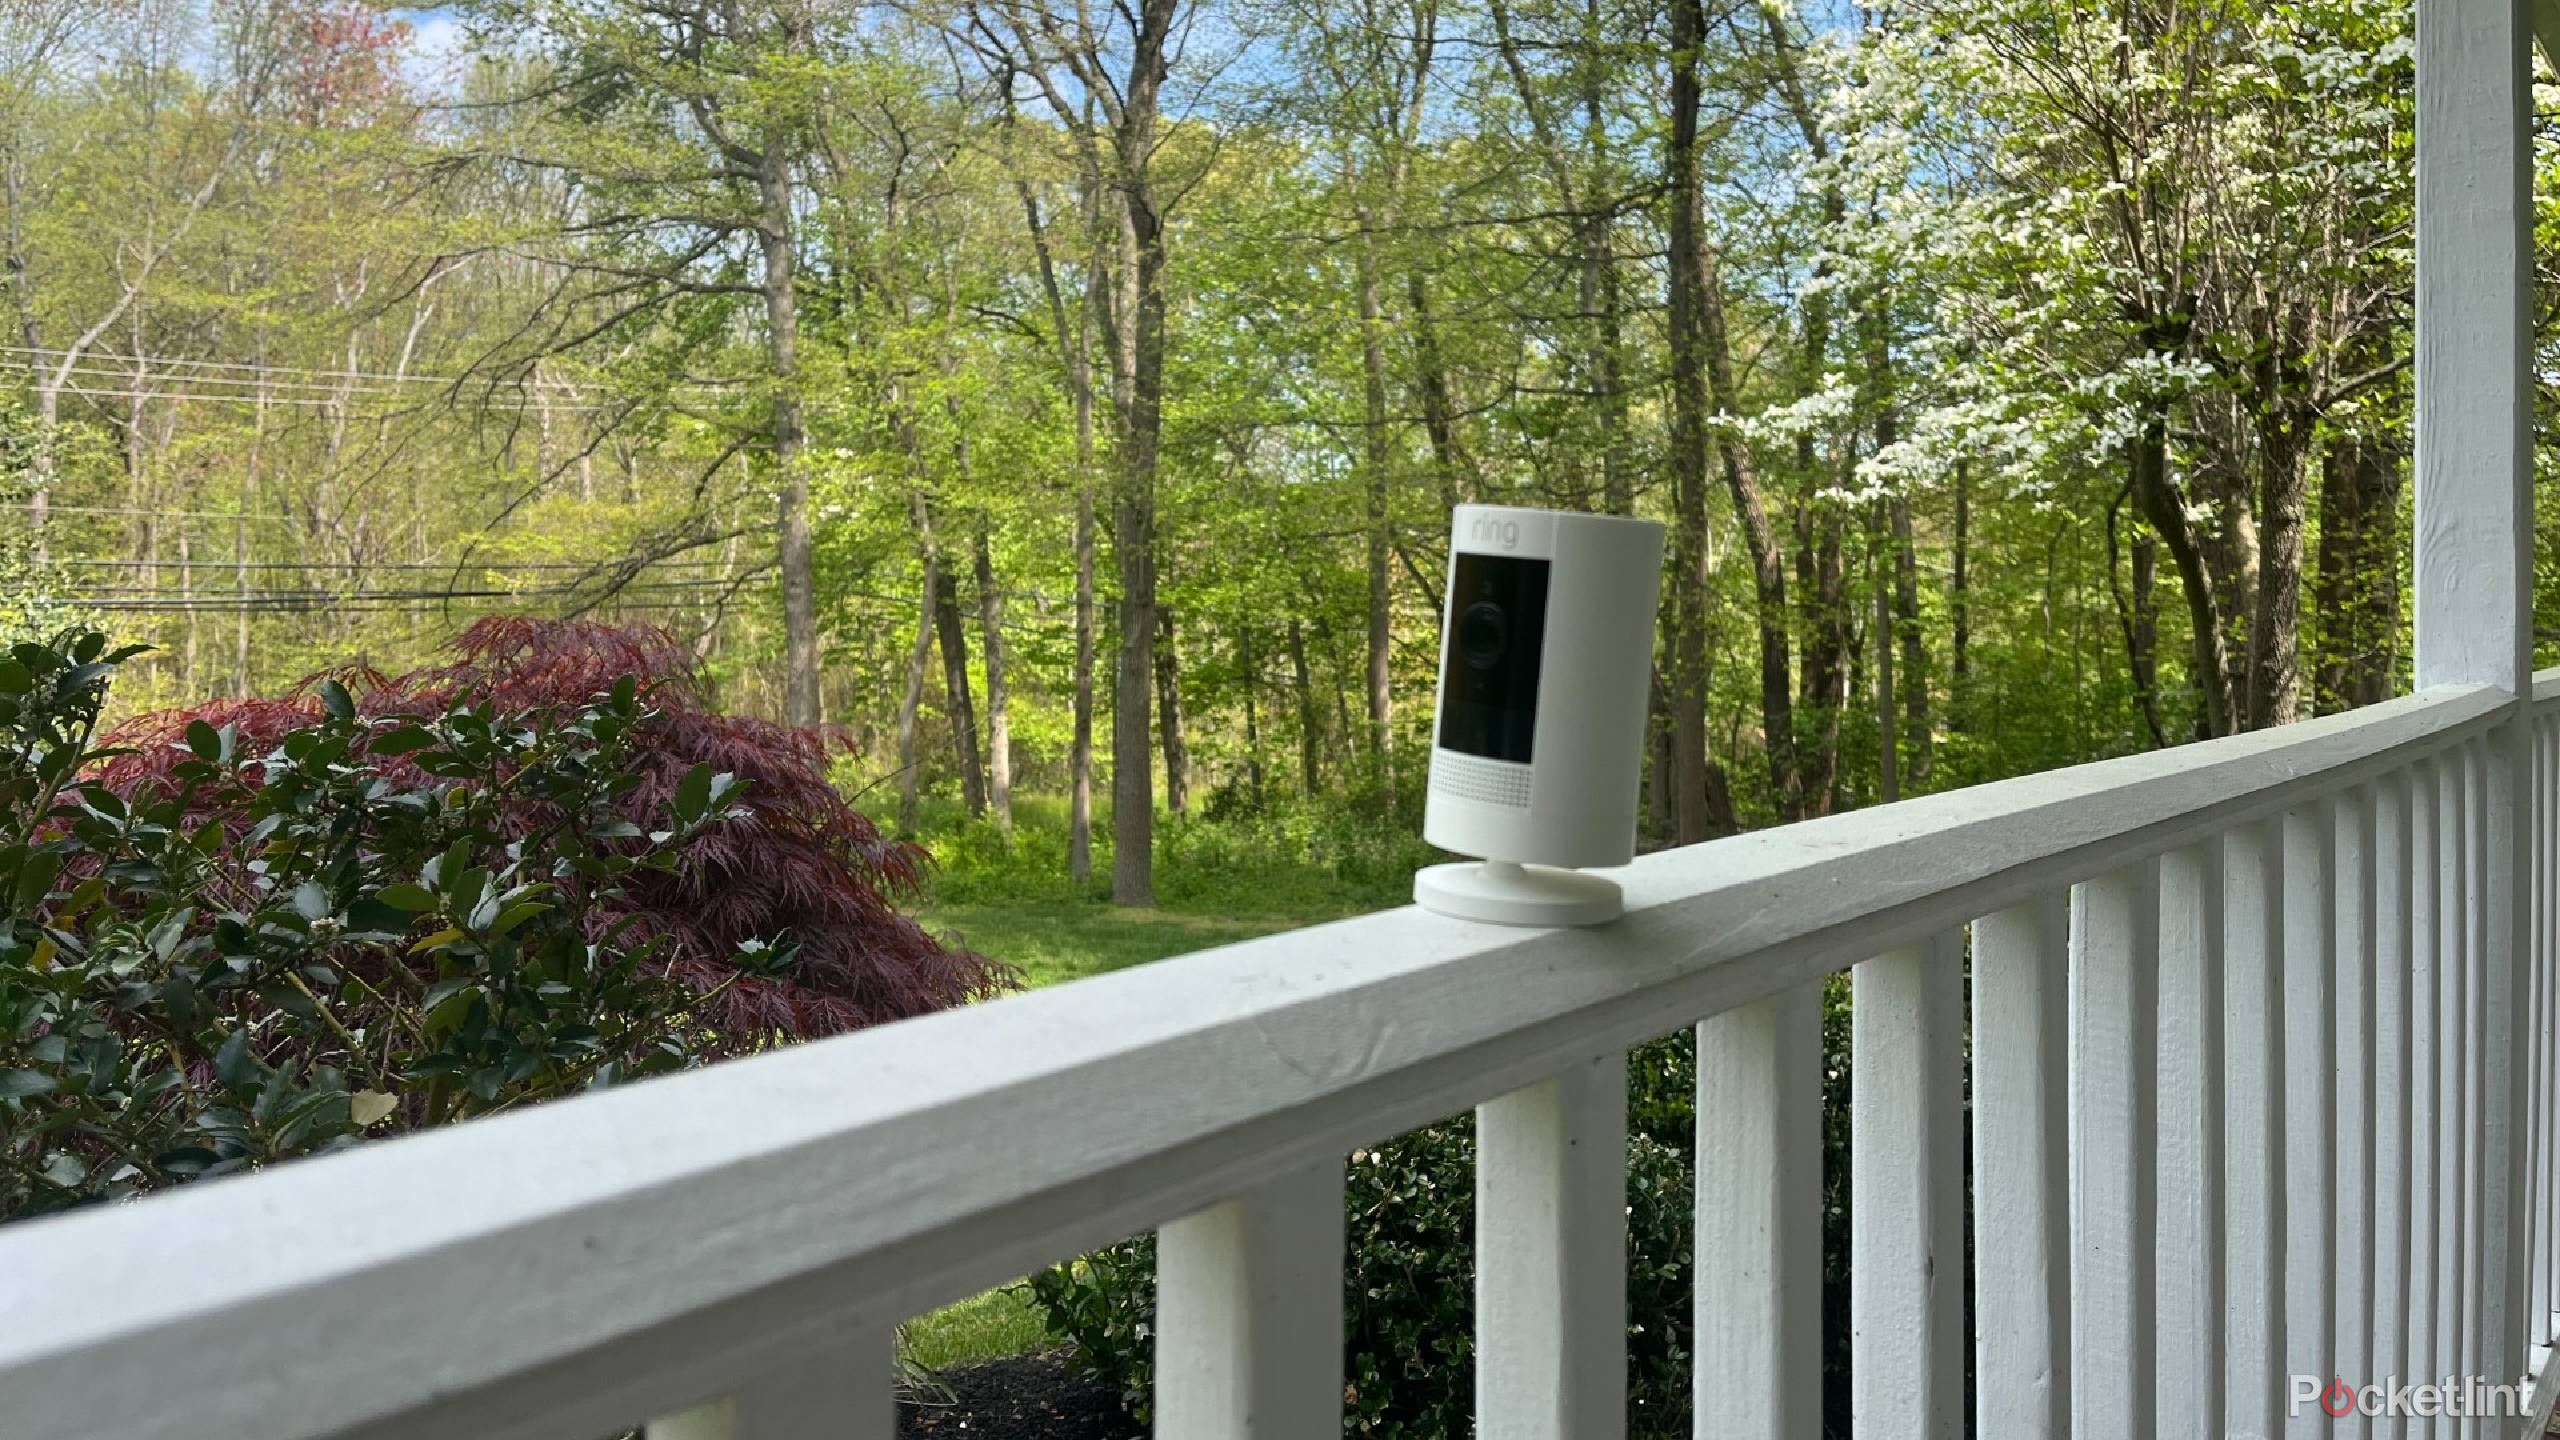 Ring Stick Up Cam Battery review: Simple and affordable